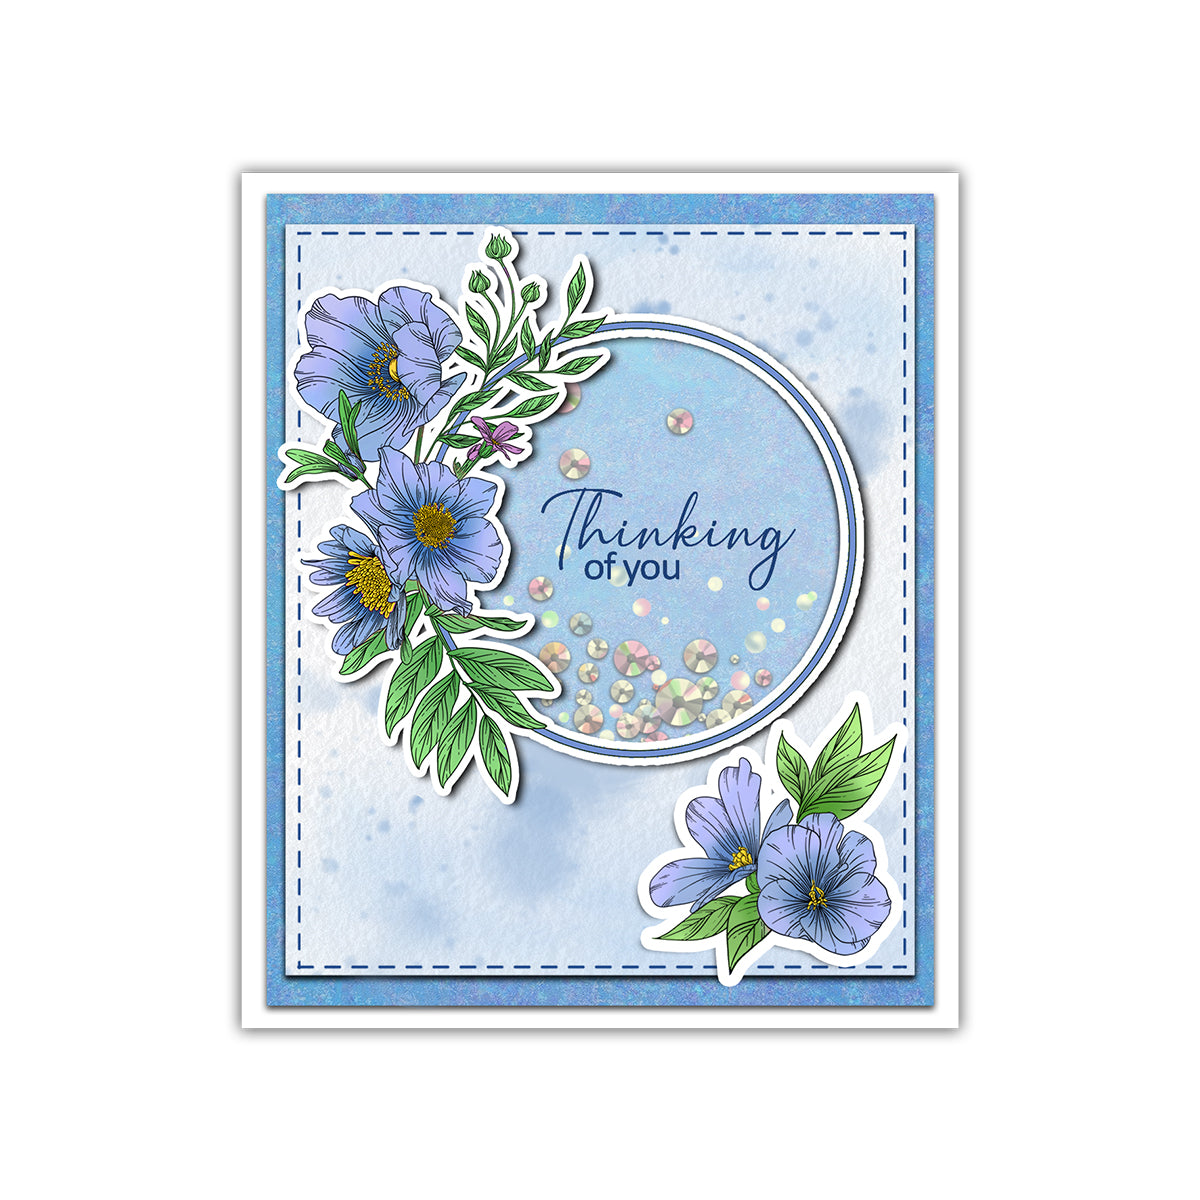 Spring Floral Blooming Flowers Cutting Dies And Stamp Set YX1153-S+D